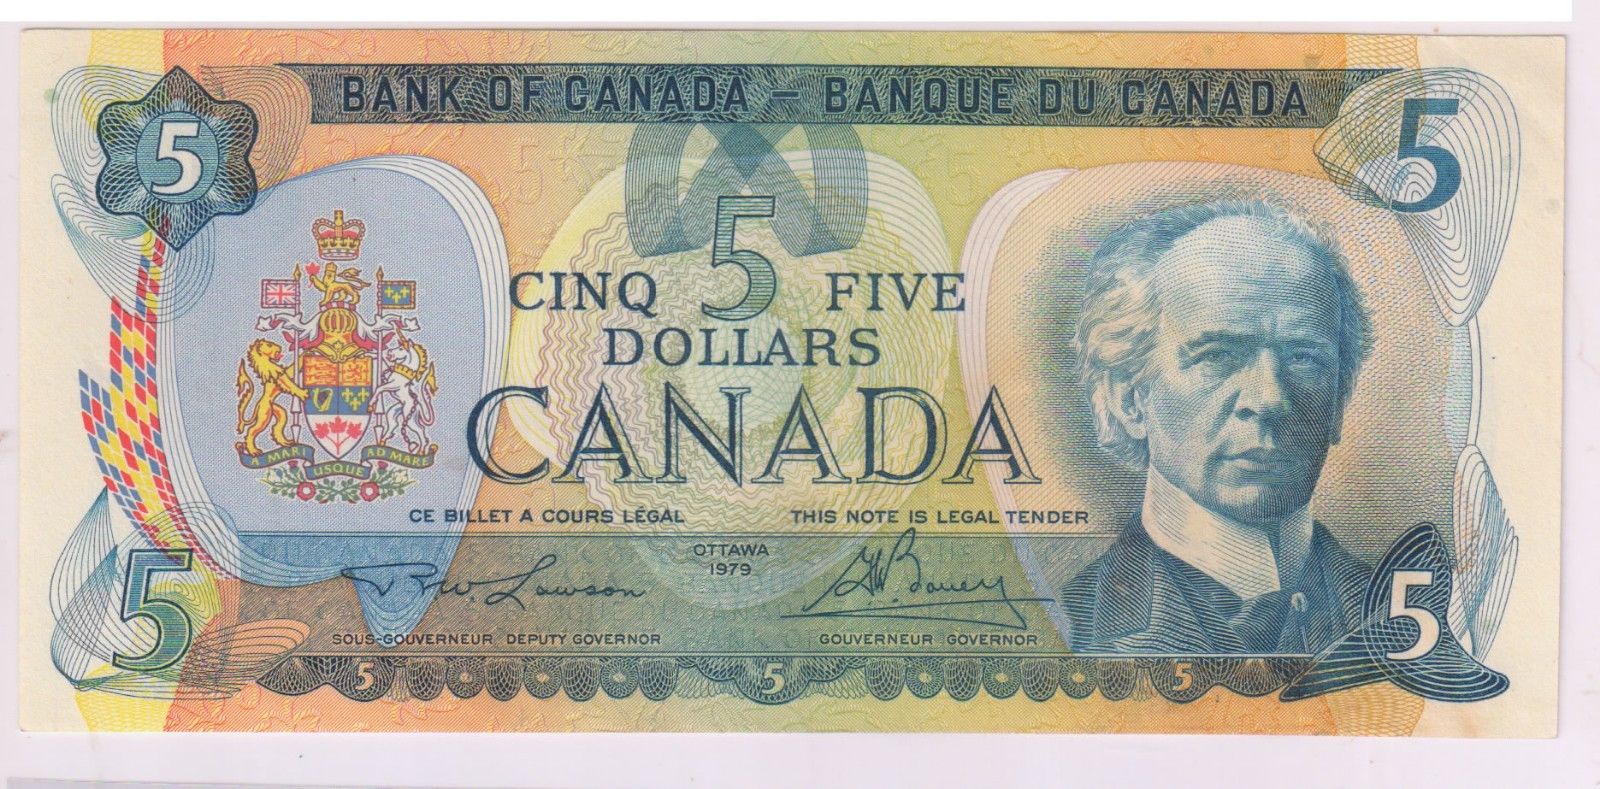 Canada - 5 dollars 1979 currency note - KB Coins & Currencies